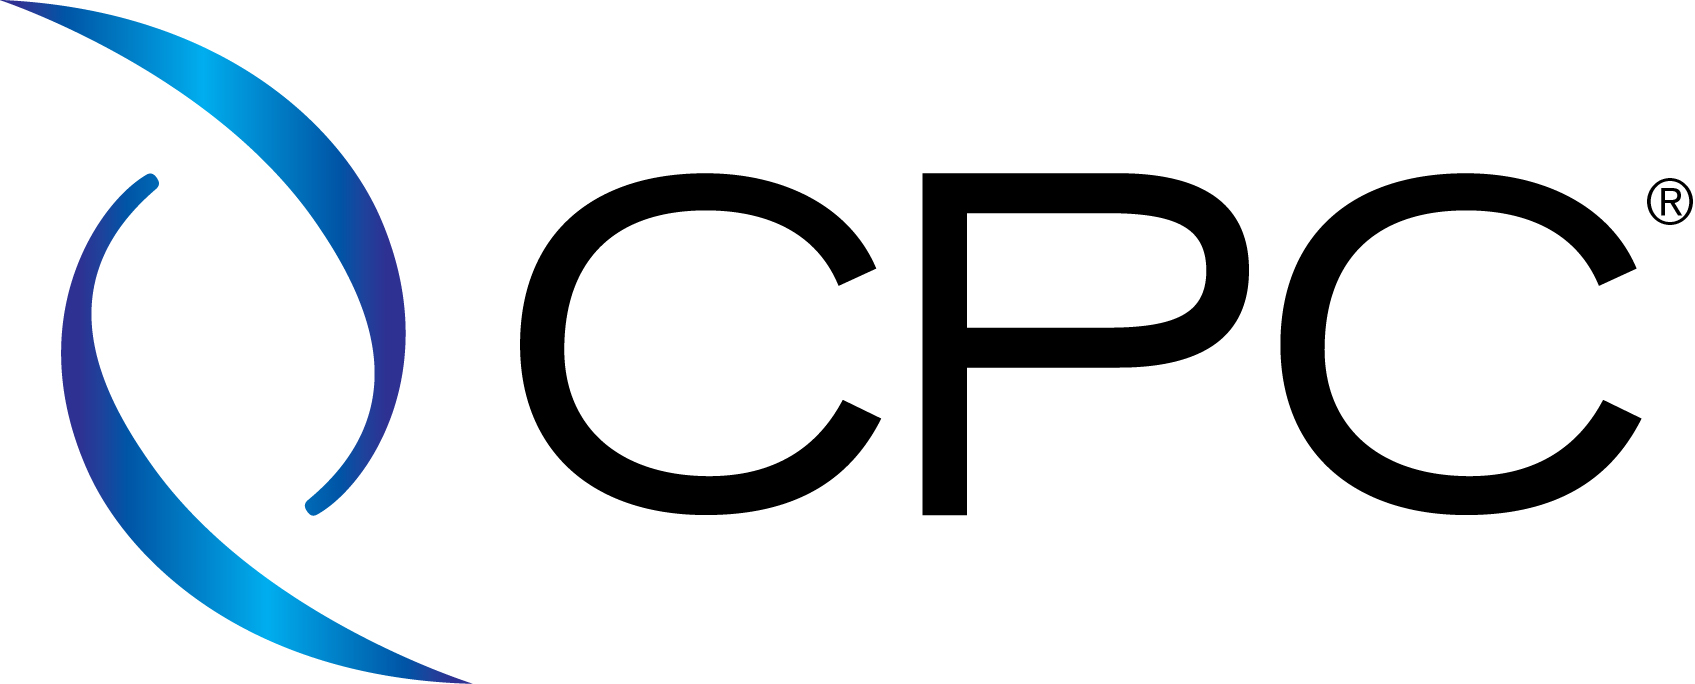 Logo for CPC